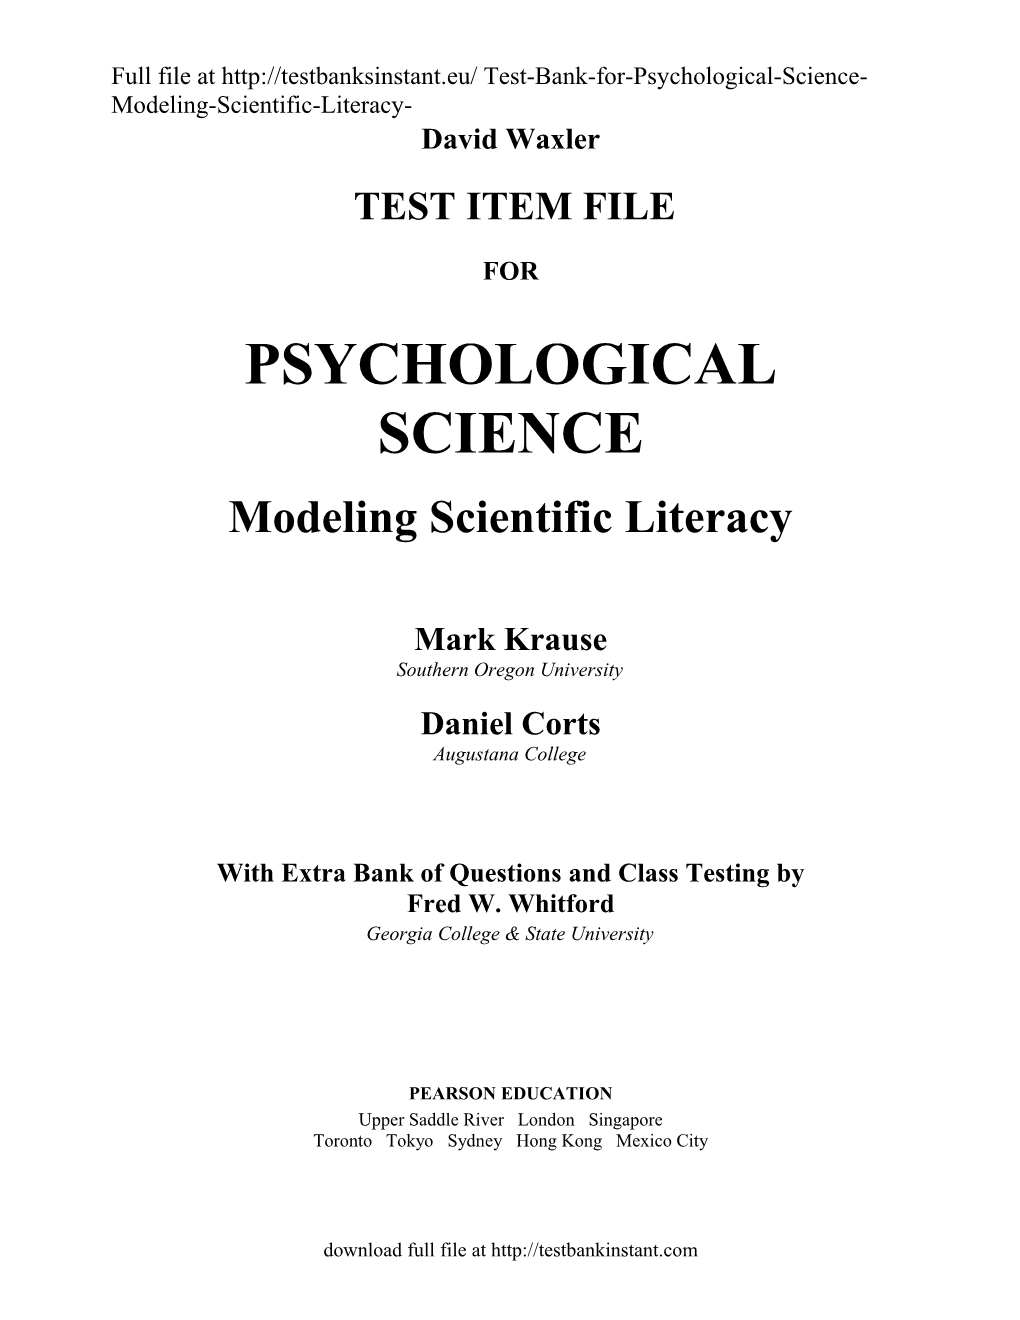 Full File at Test-Bank-For-Psychological-Science-Modeling-Scientific-Literacy